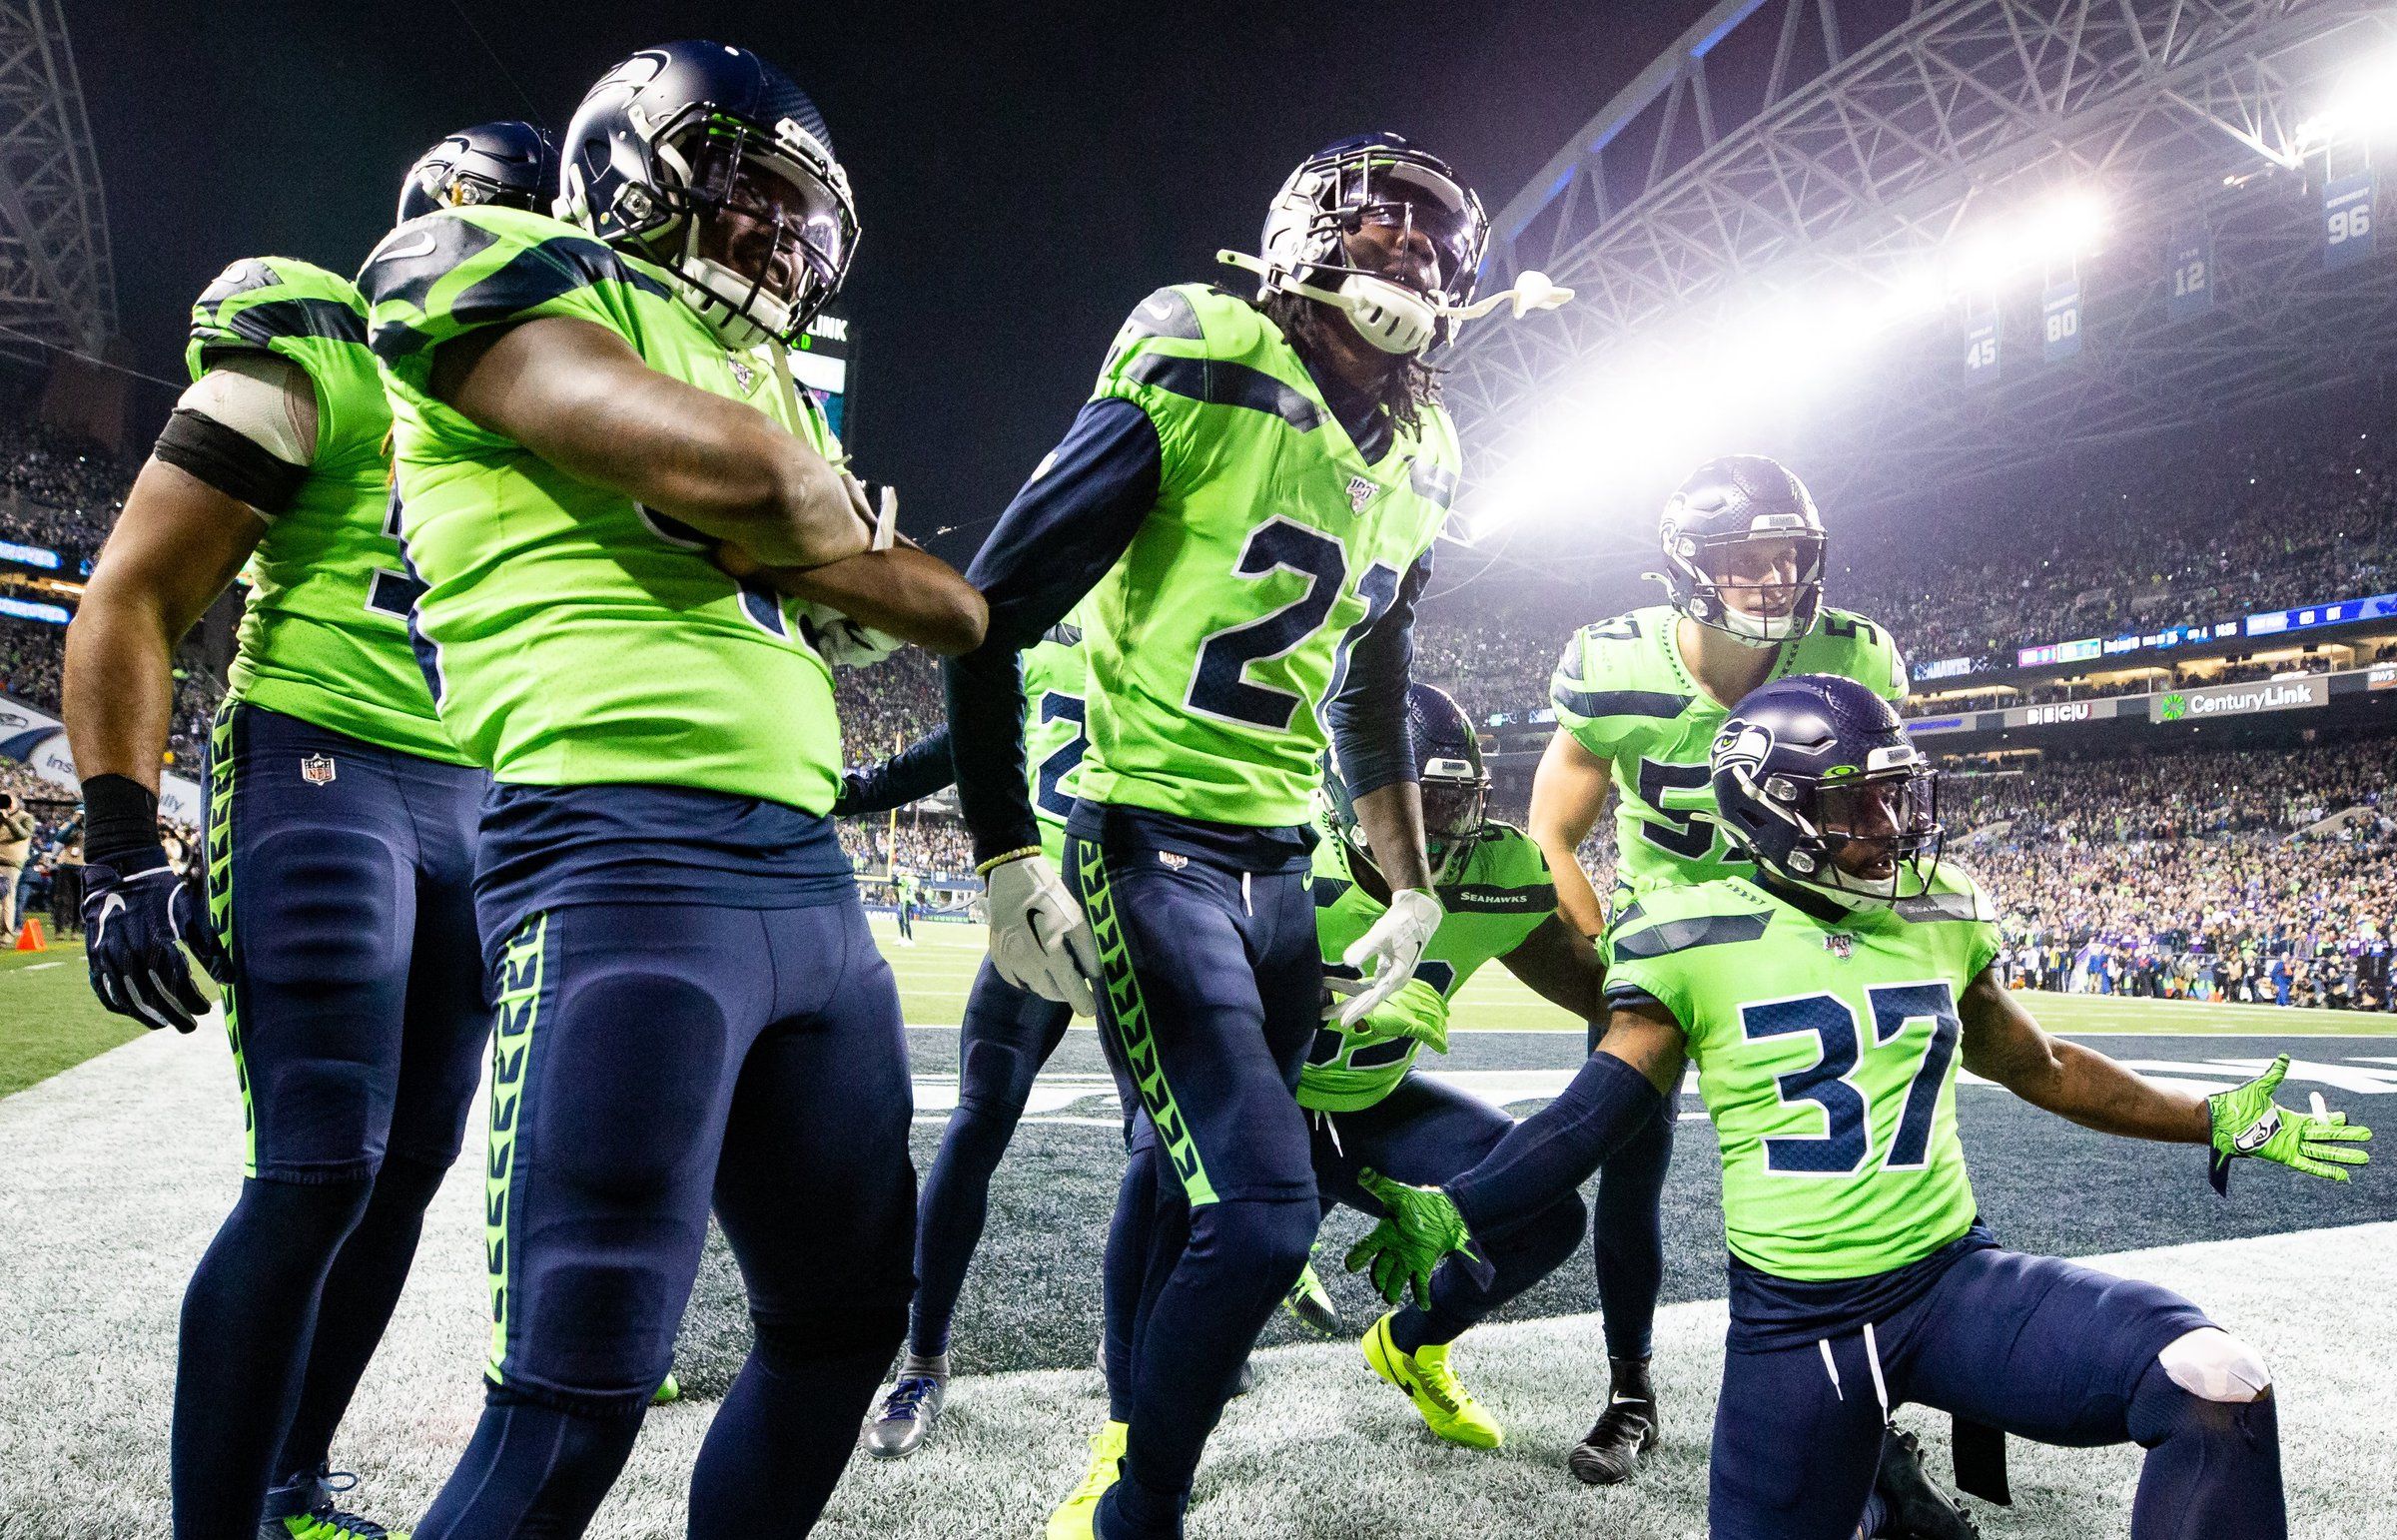 Are Seahawks Super Bowl contenders? Here's what the